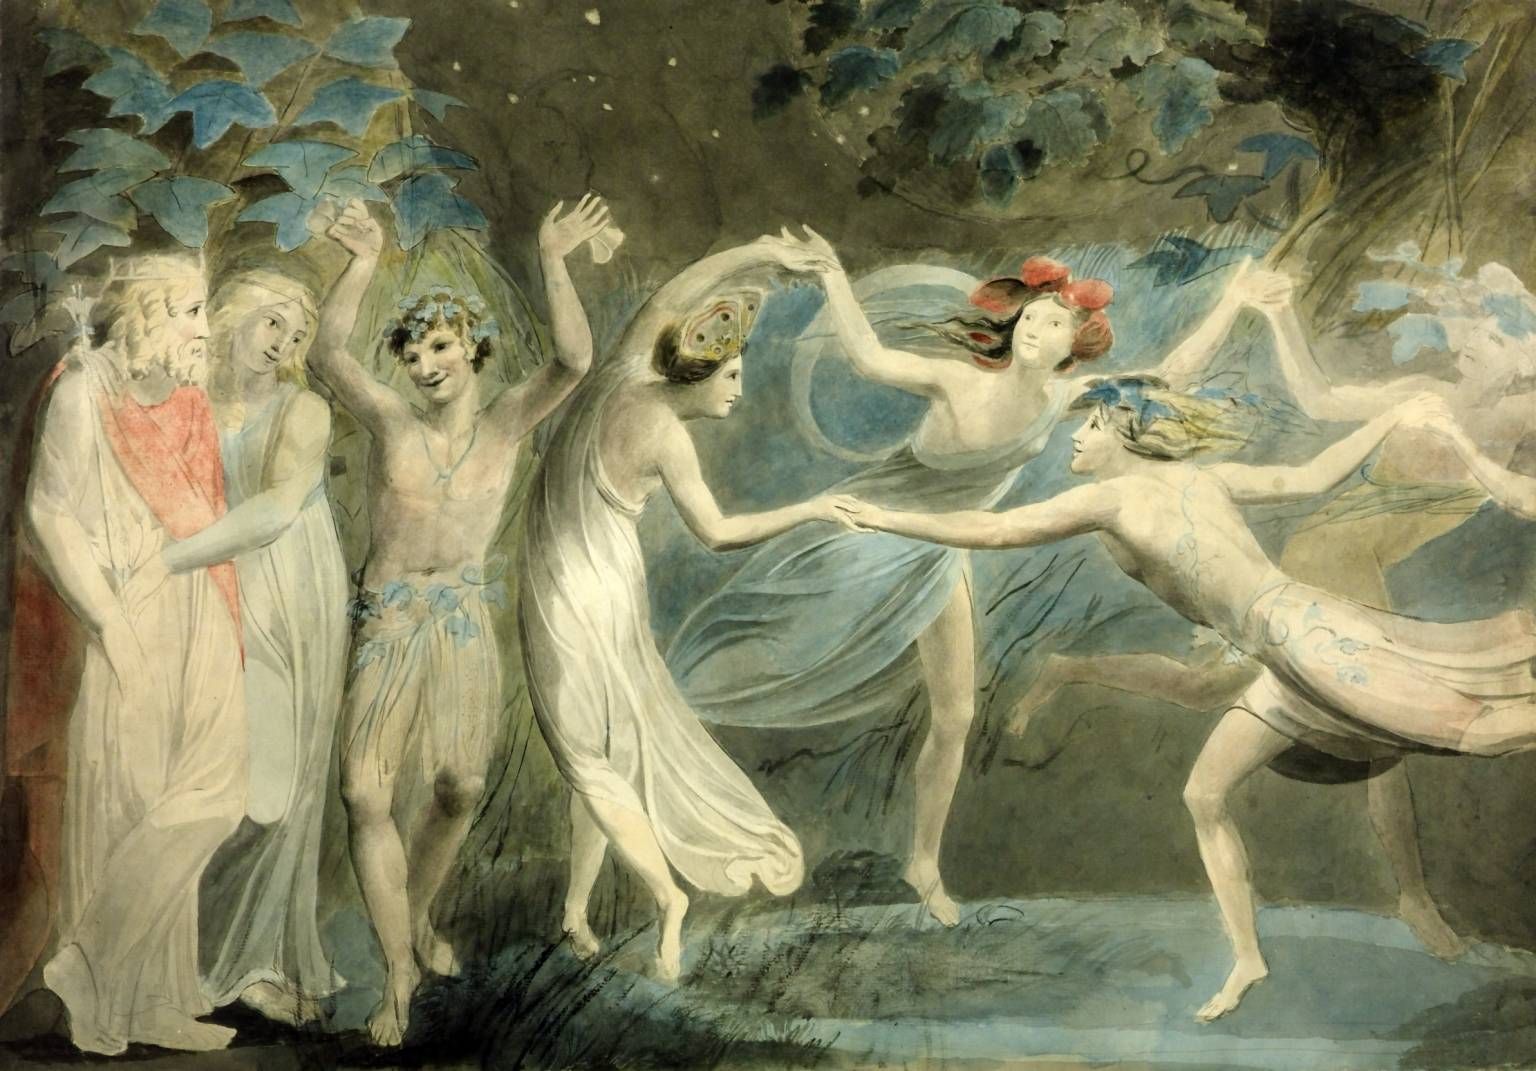 A painting of "Oberon, Titania and Puck with Fairies Dancing" by William Blake, c. 1786